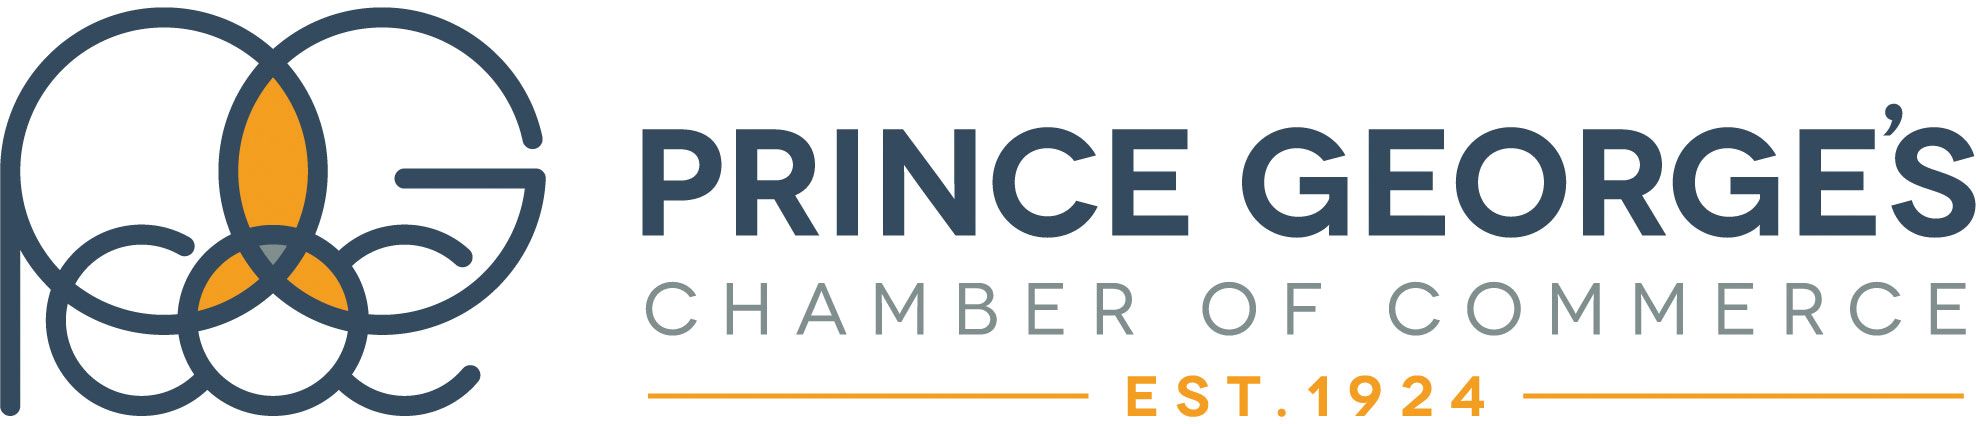 Prince George's Chamber if Commerce Est. 1924